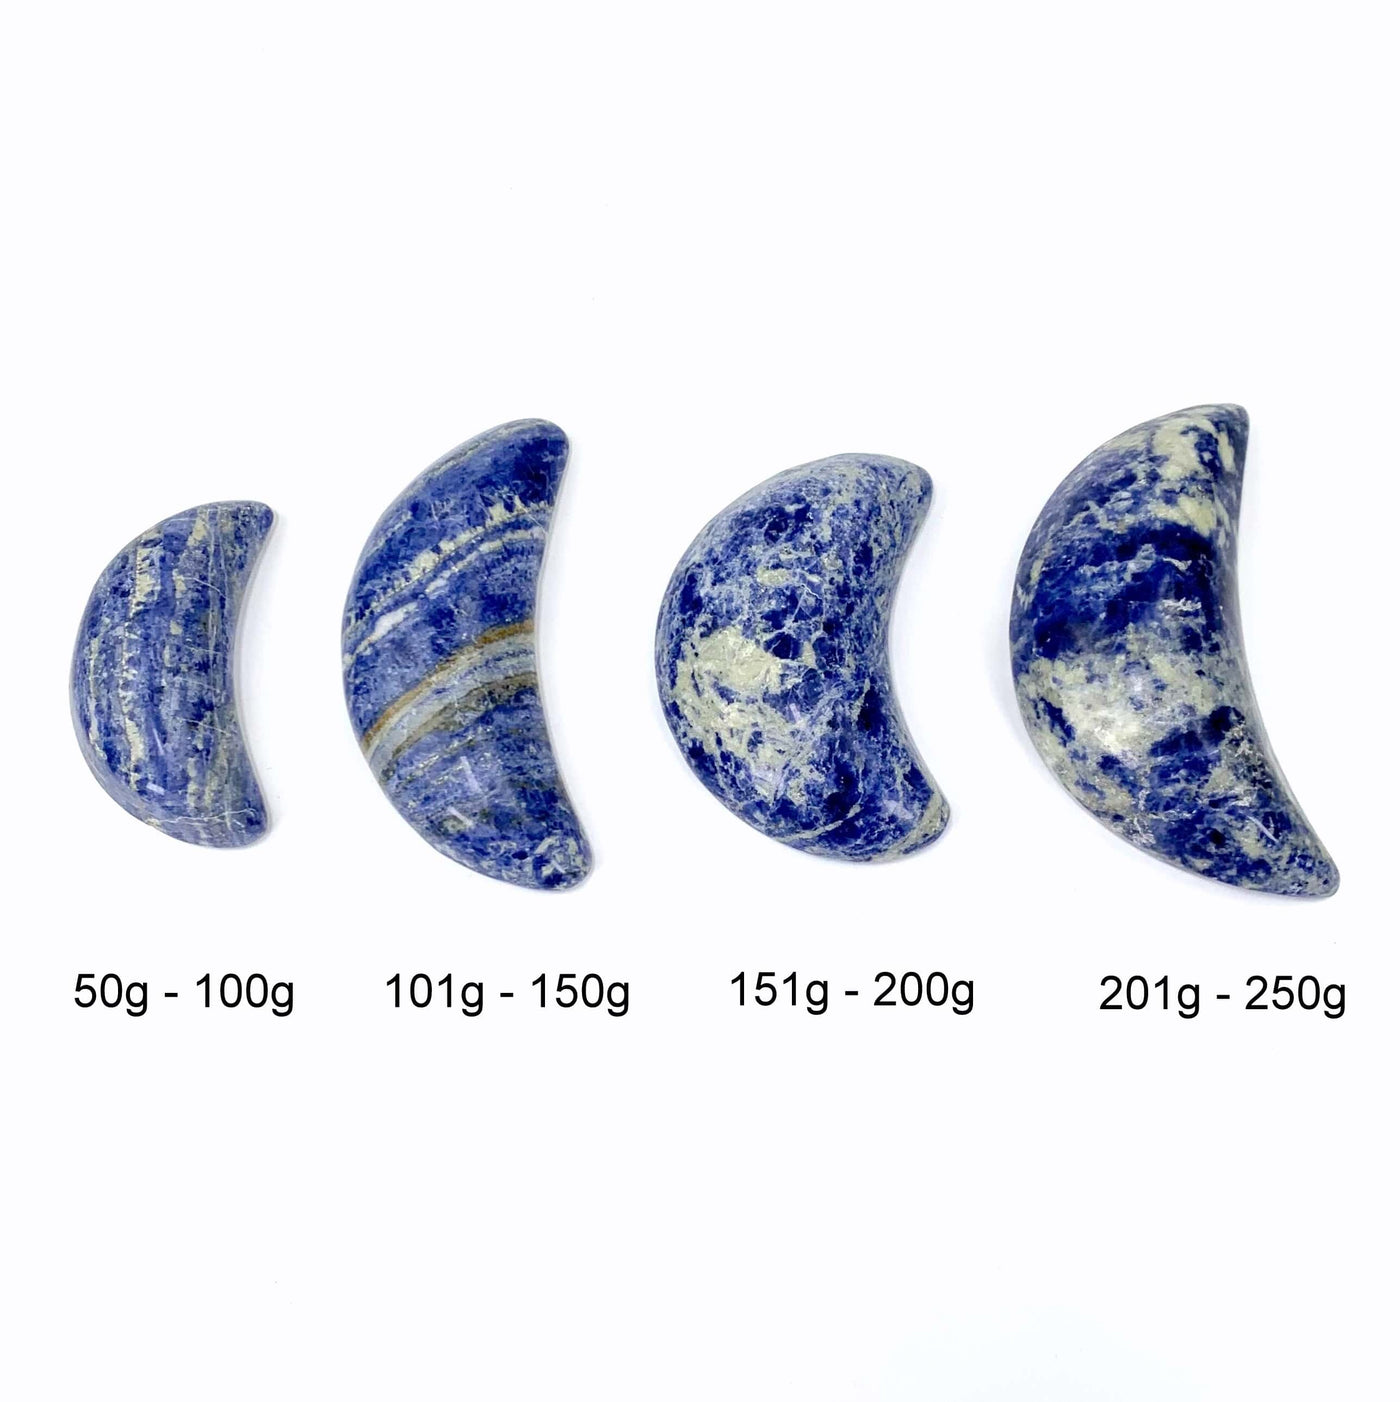 all 4 variants of sodalite moons on white background labeled